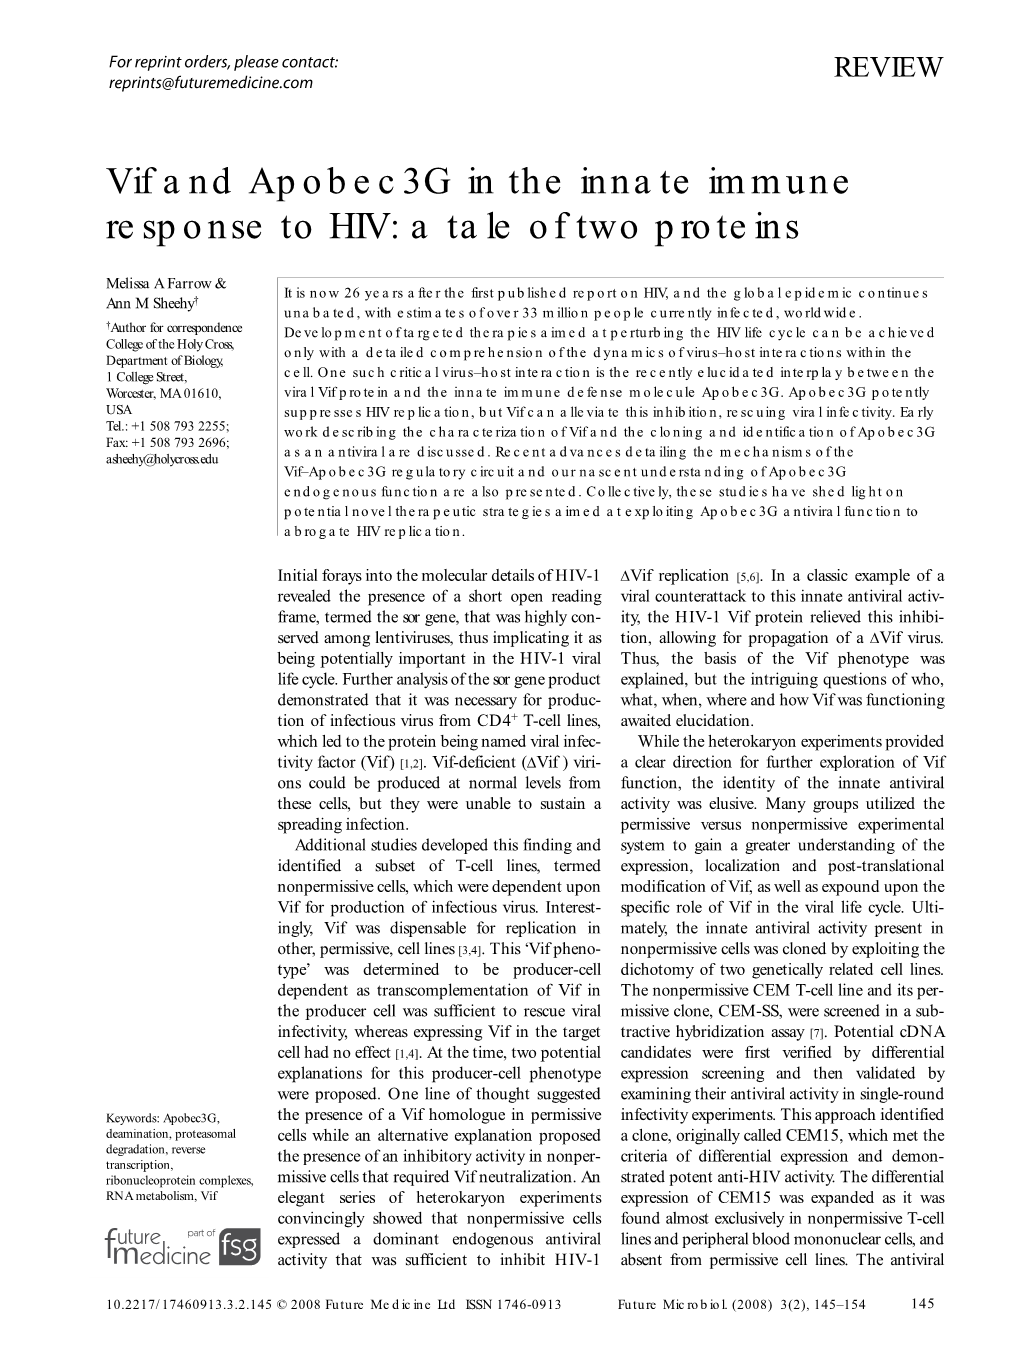 Vif and Apobec3g in the Innate Immune Response to HIV: a Tale of Two Proteins